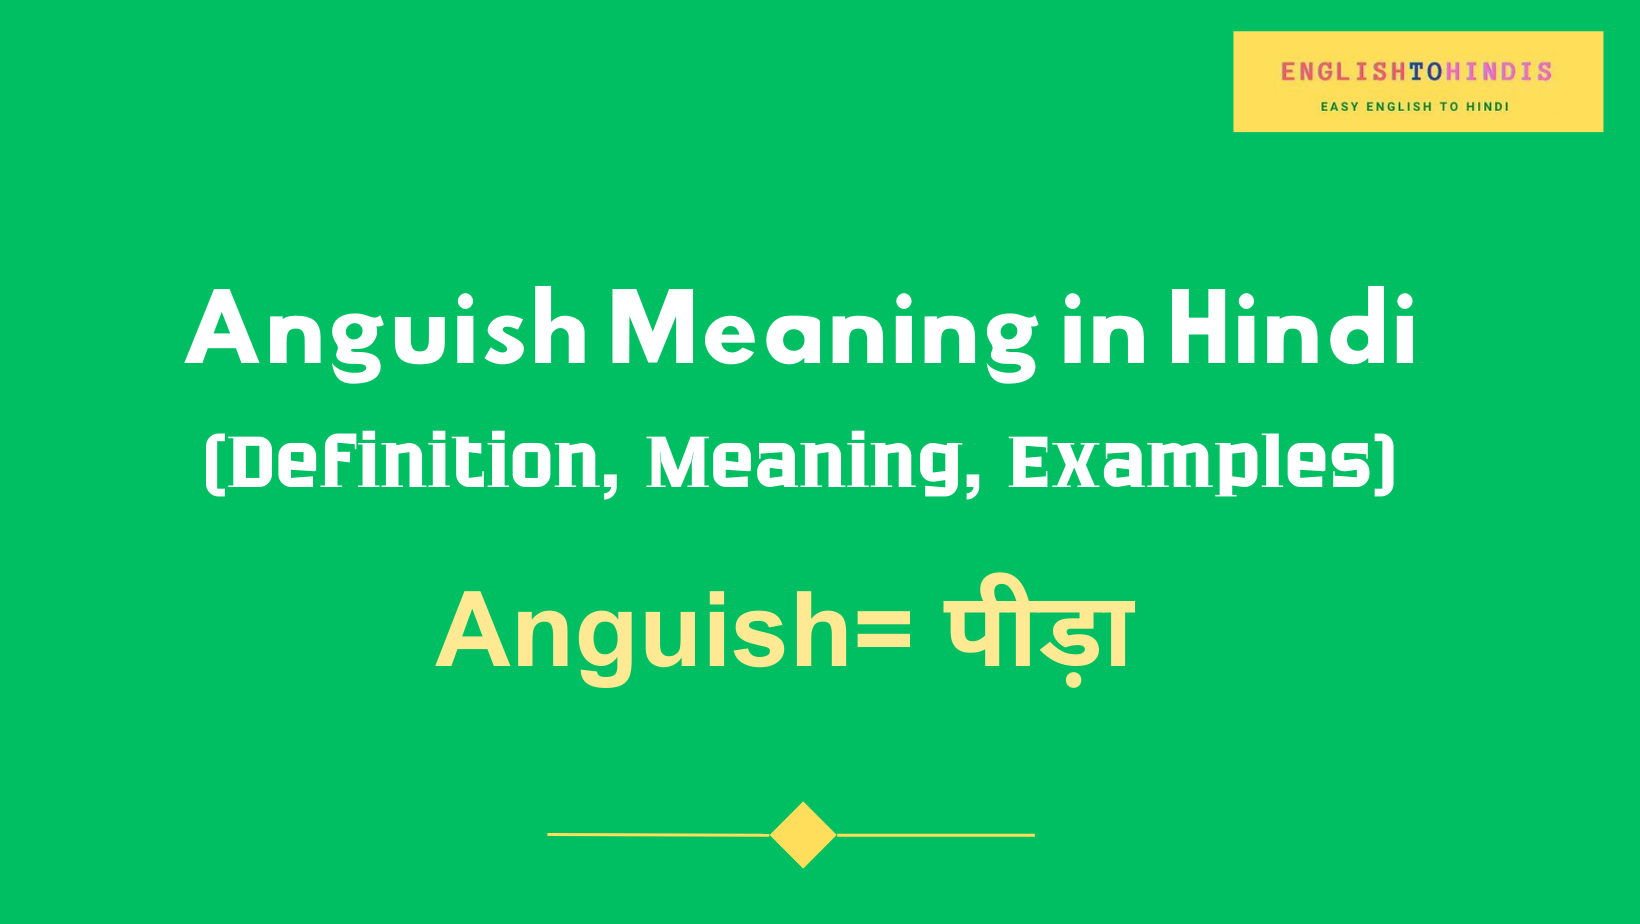 Anguish meaning in Hindi